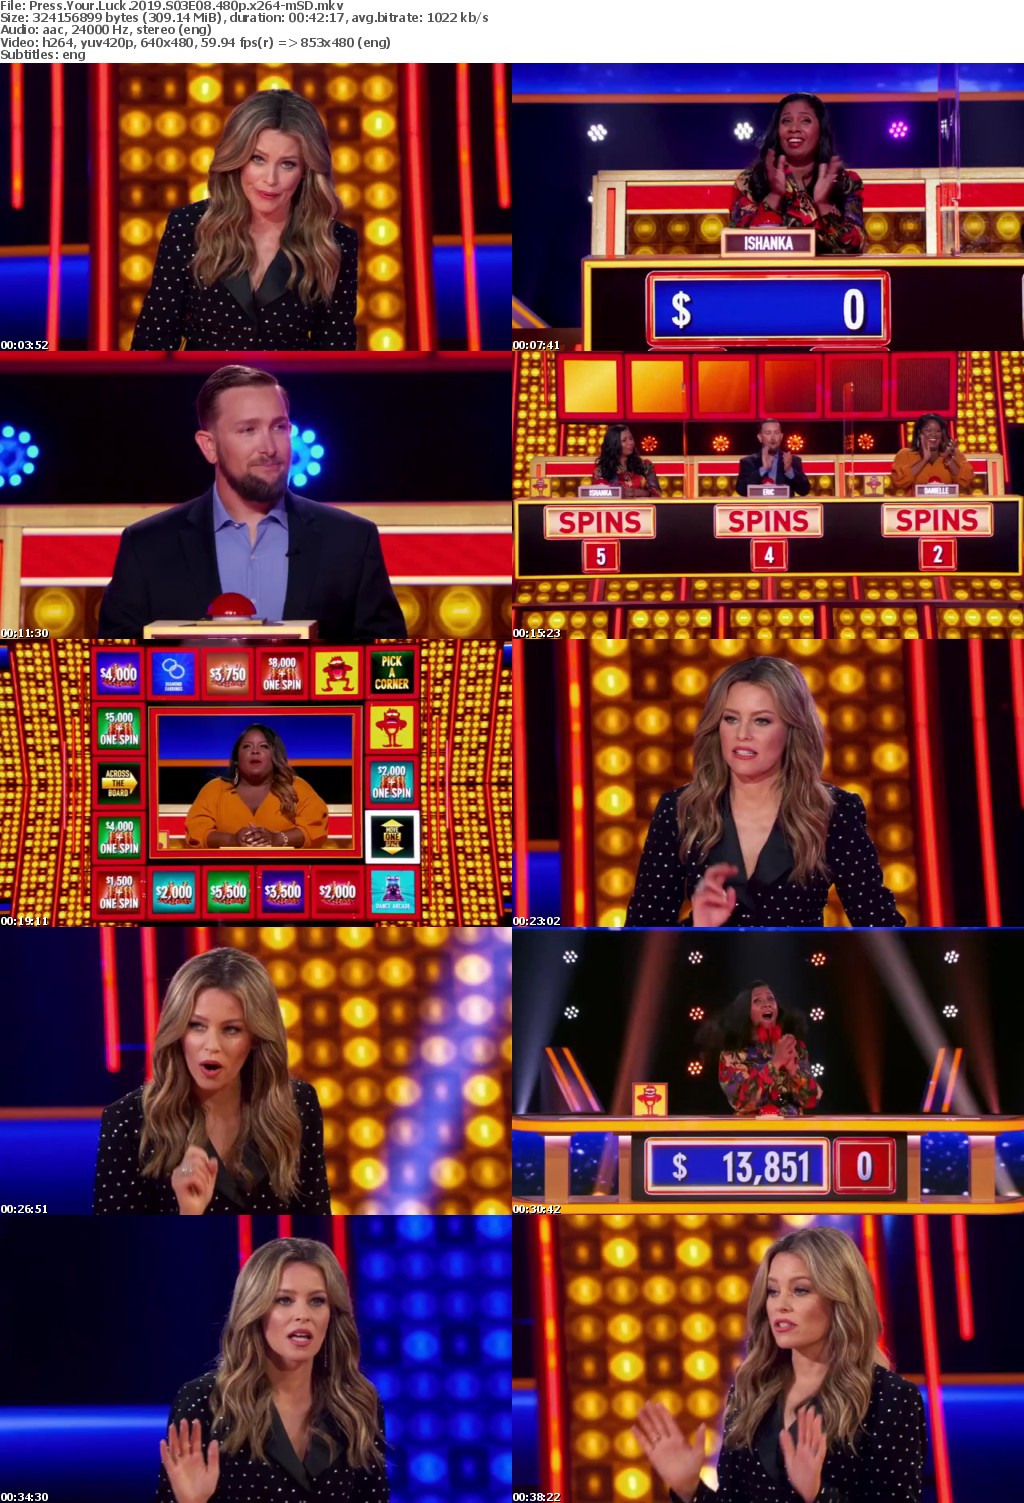 Press Your Luck 2019 S03E08 480p x264-mSD